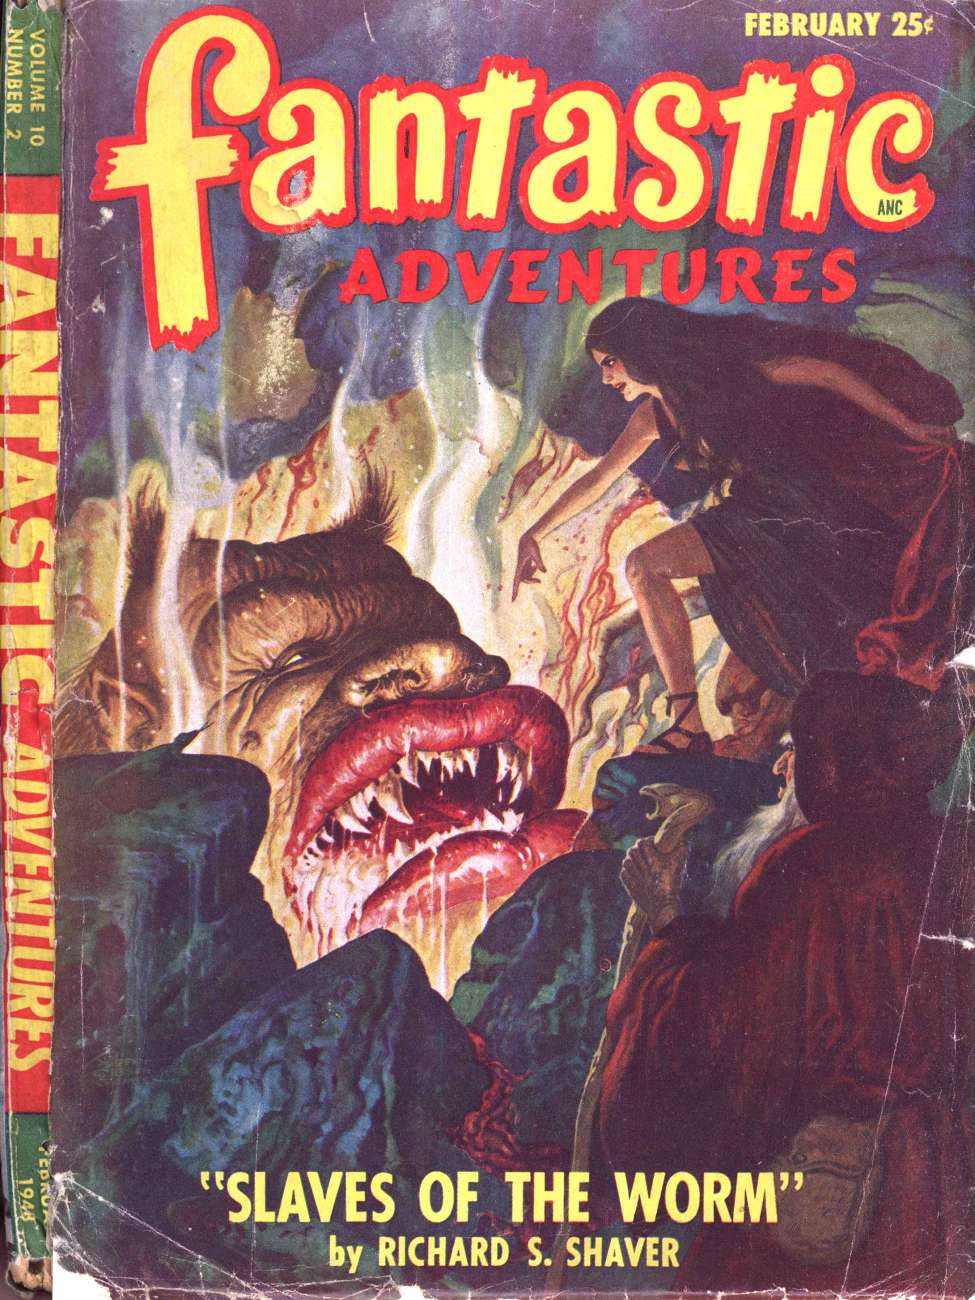 Comic Book Cover For Fantastic Adventures v10 2 - Slaves of the Worm - Richard S. Shaver